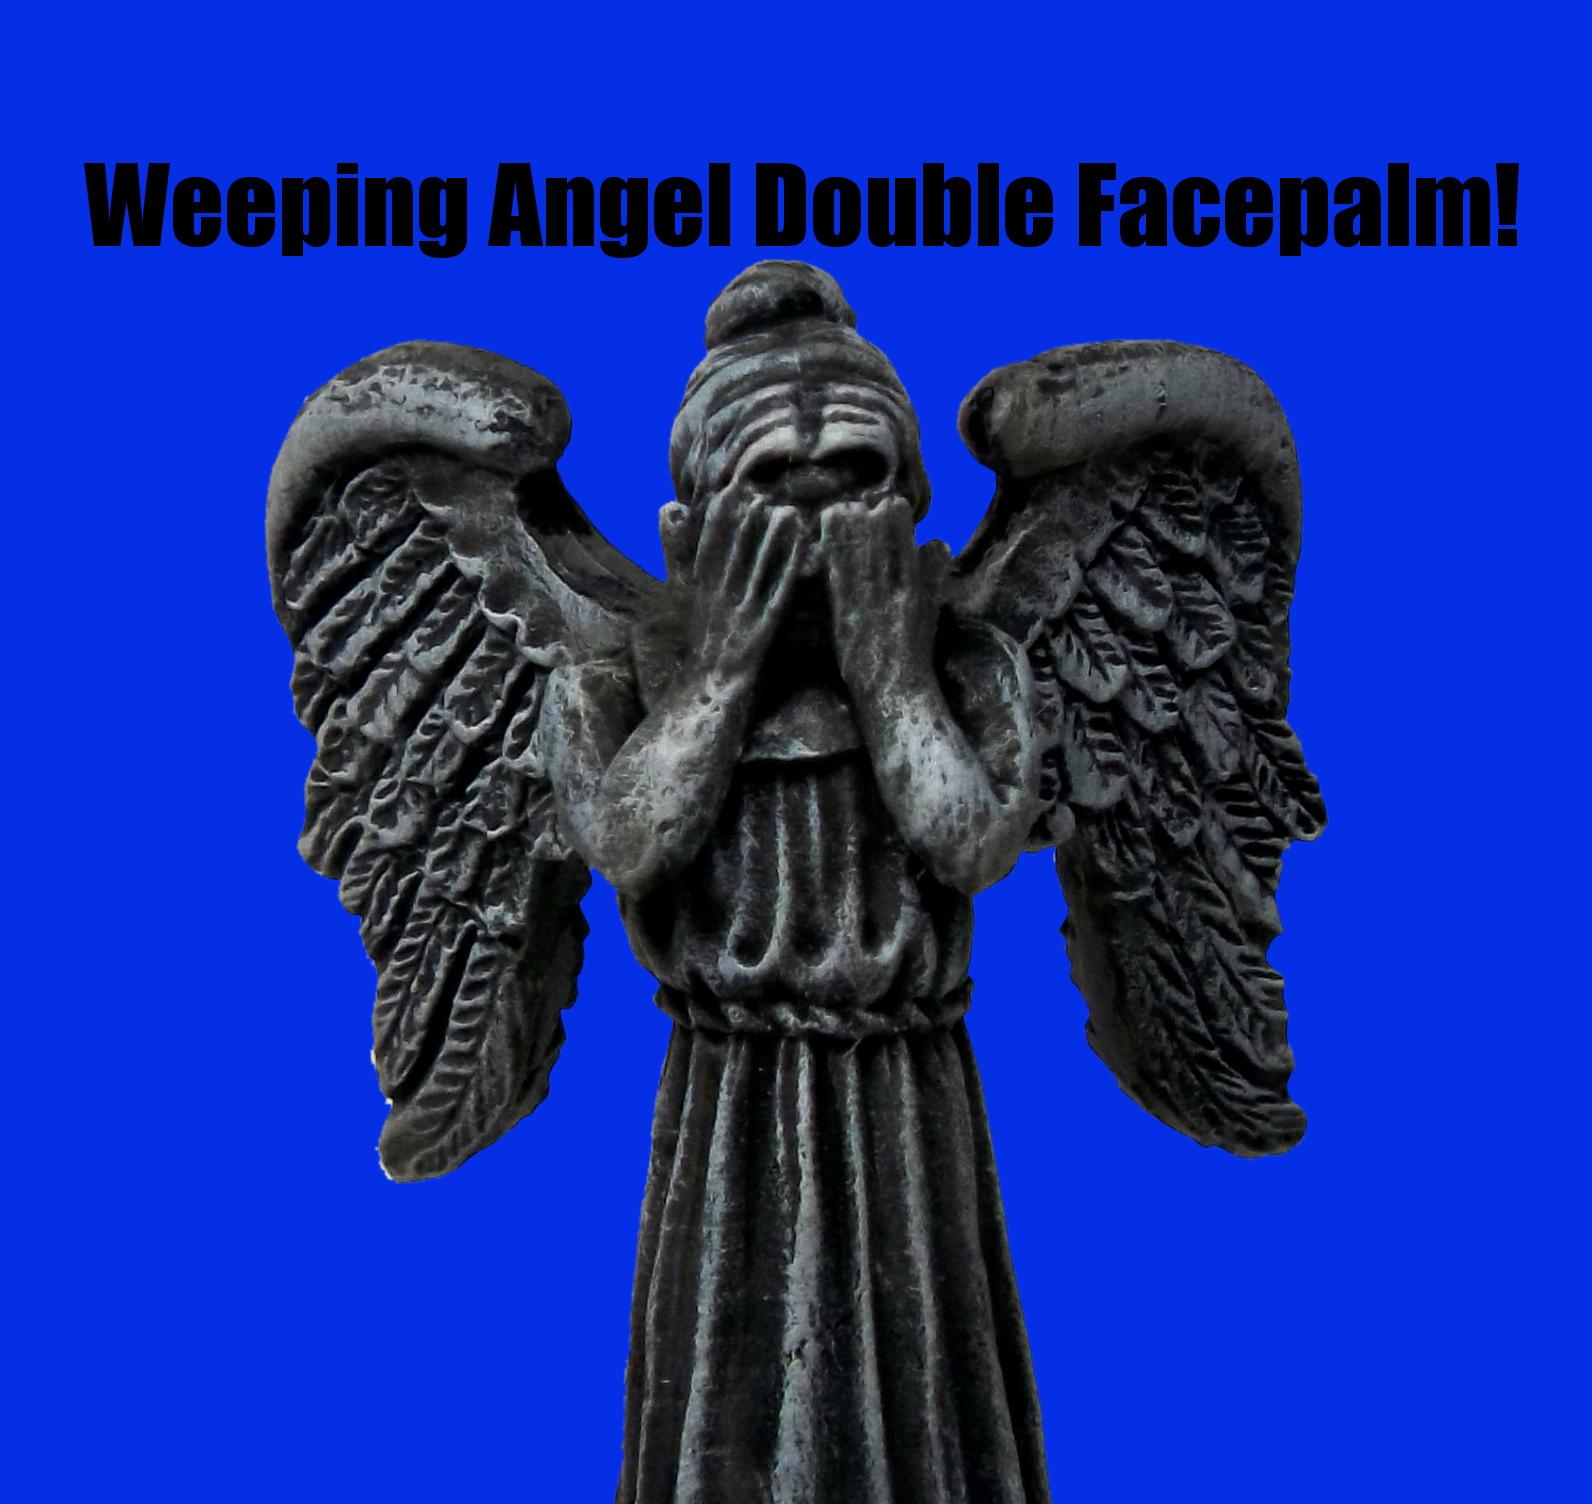 Weeping Angel Performing Double Facepalm